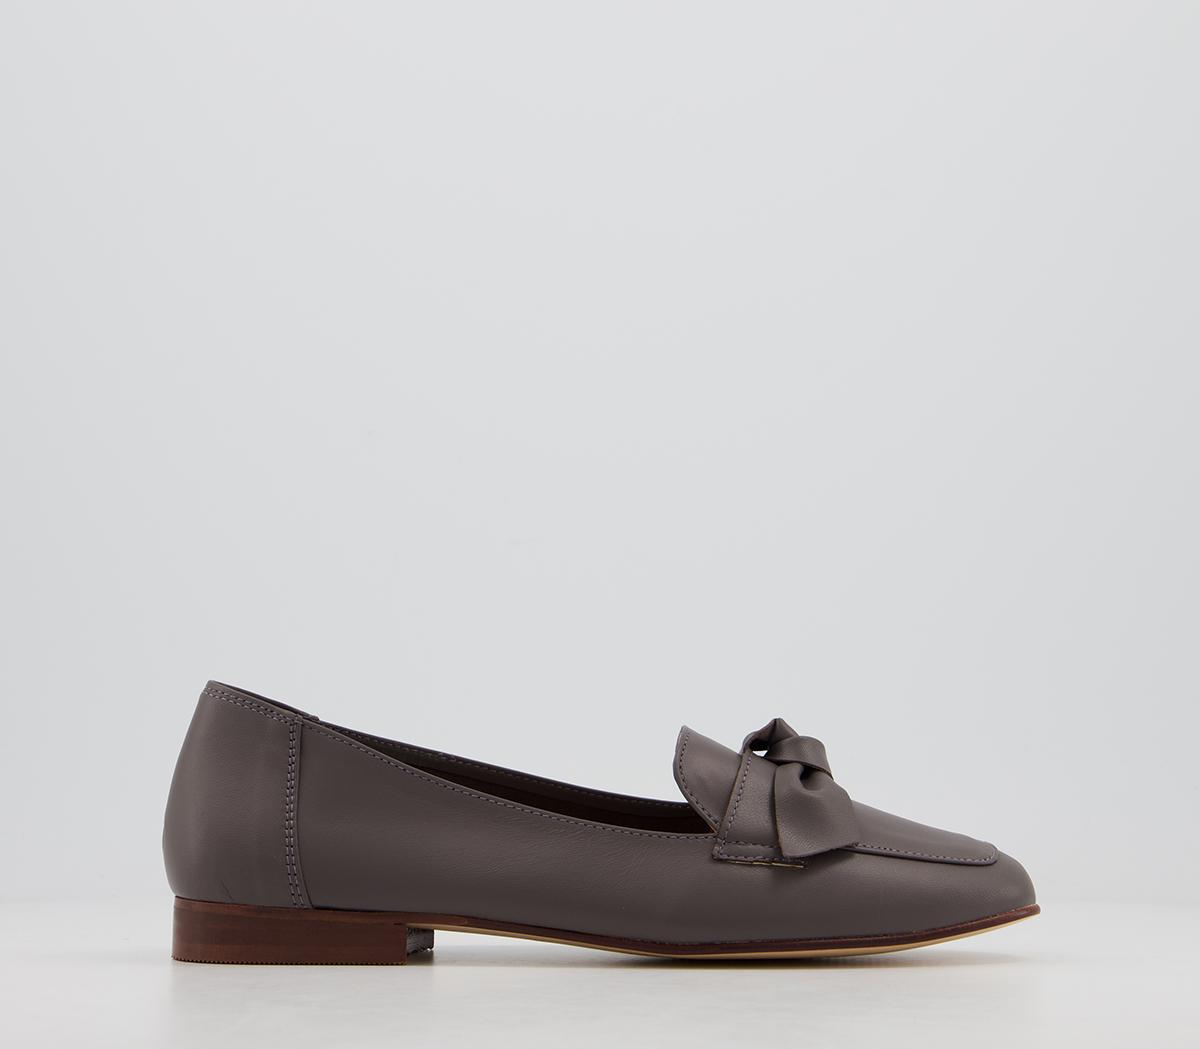 OFFICEFavoured Bow LoafersTaupe Leather